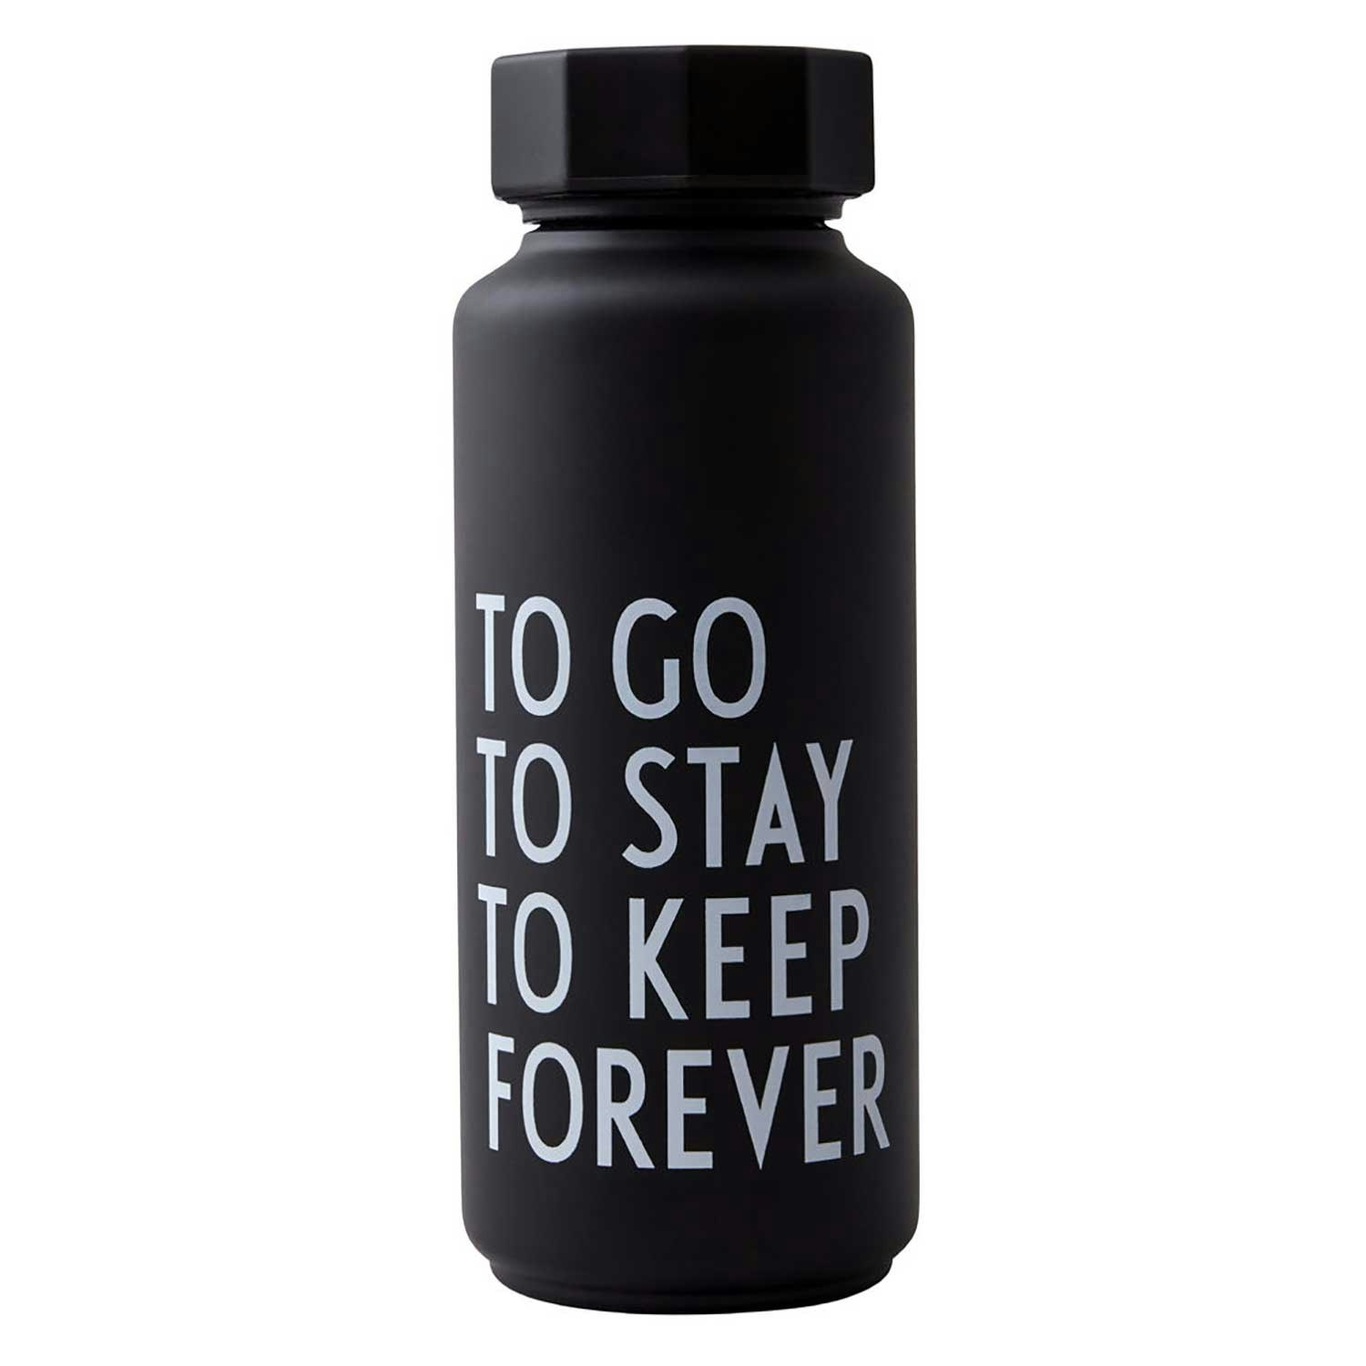 https://royaldesign.com/image/2/design-letters-thermo-bottle-special-edition-1?w=800&quality=80